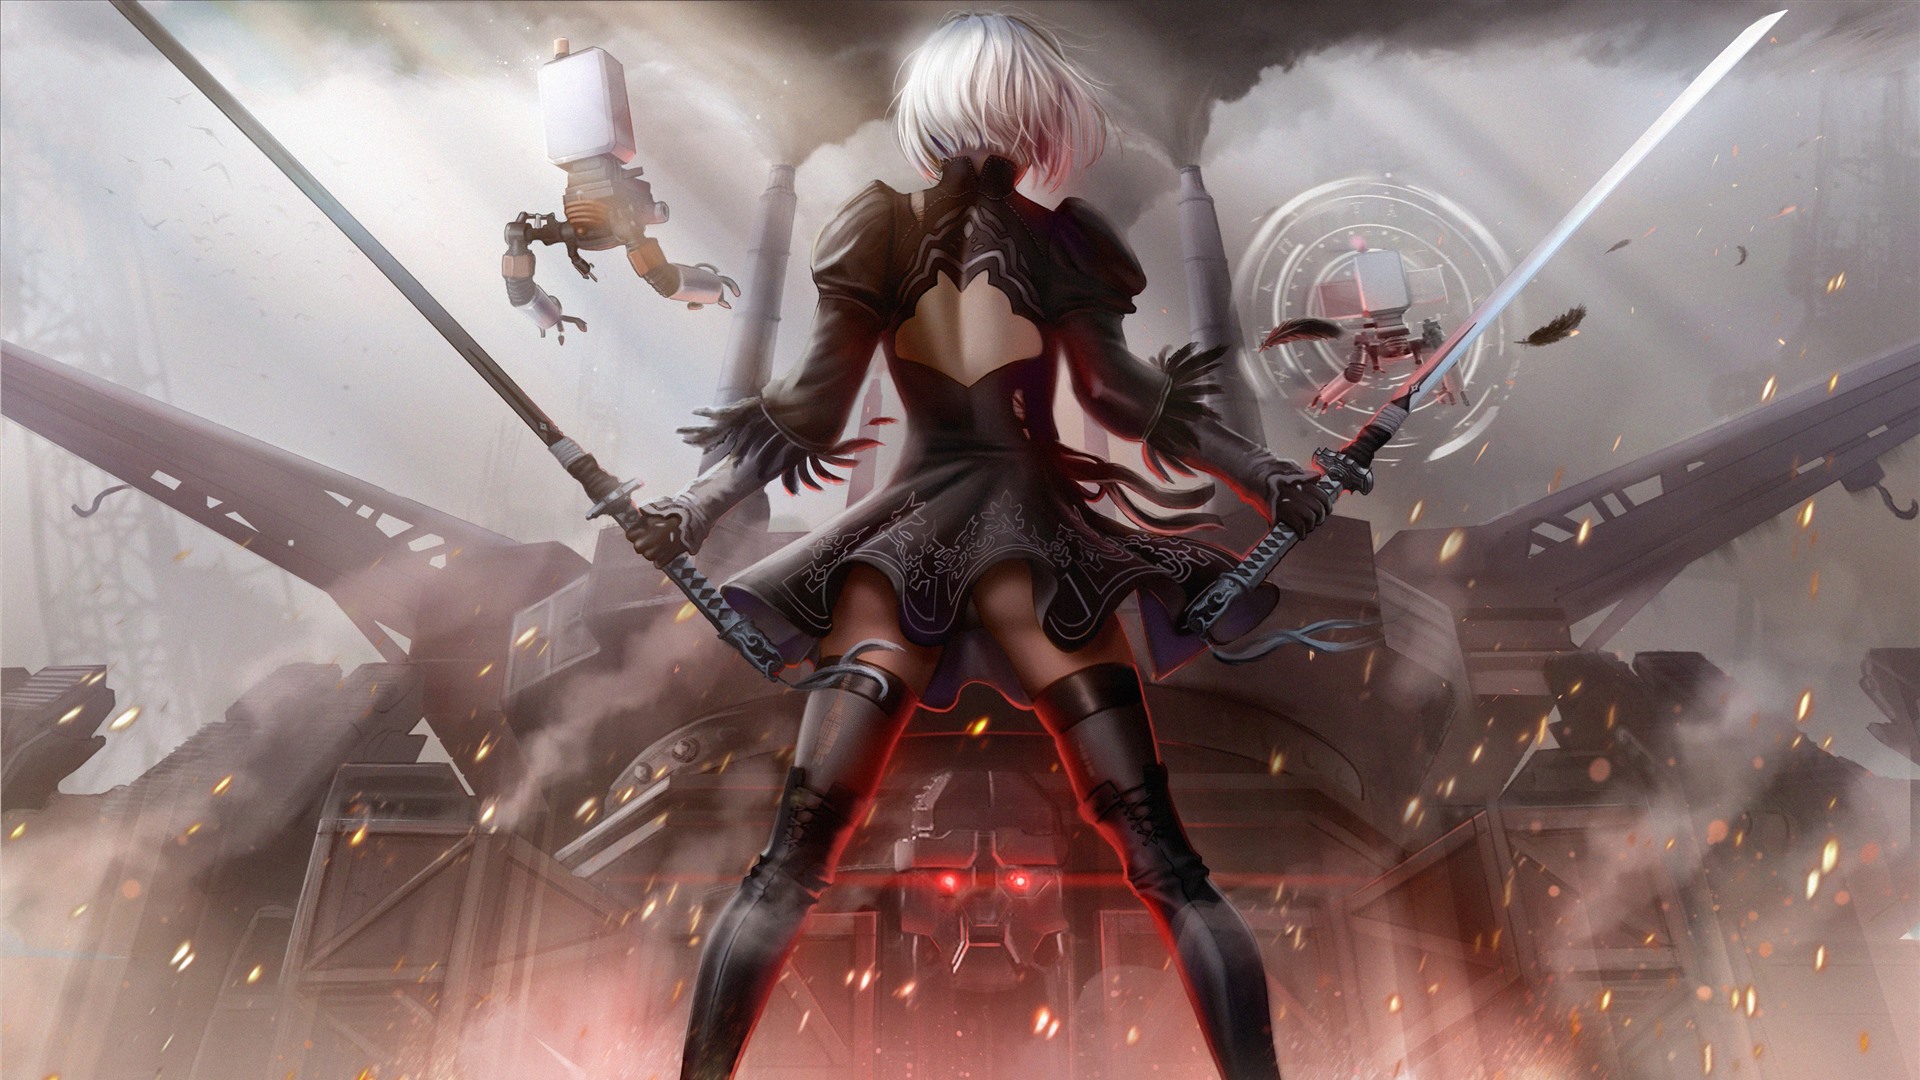 download 2b nier automata for free